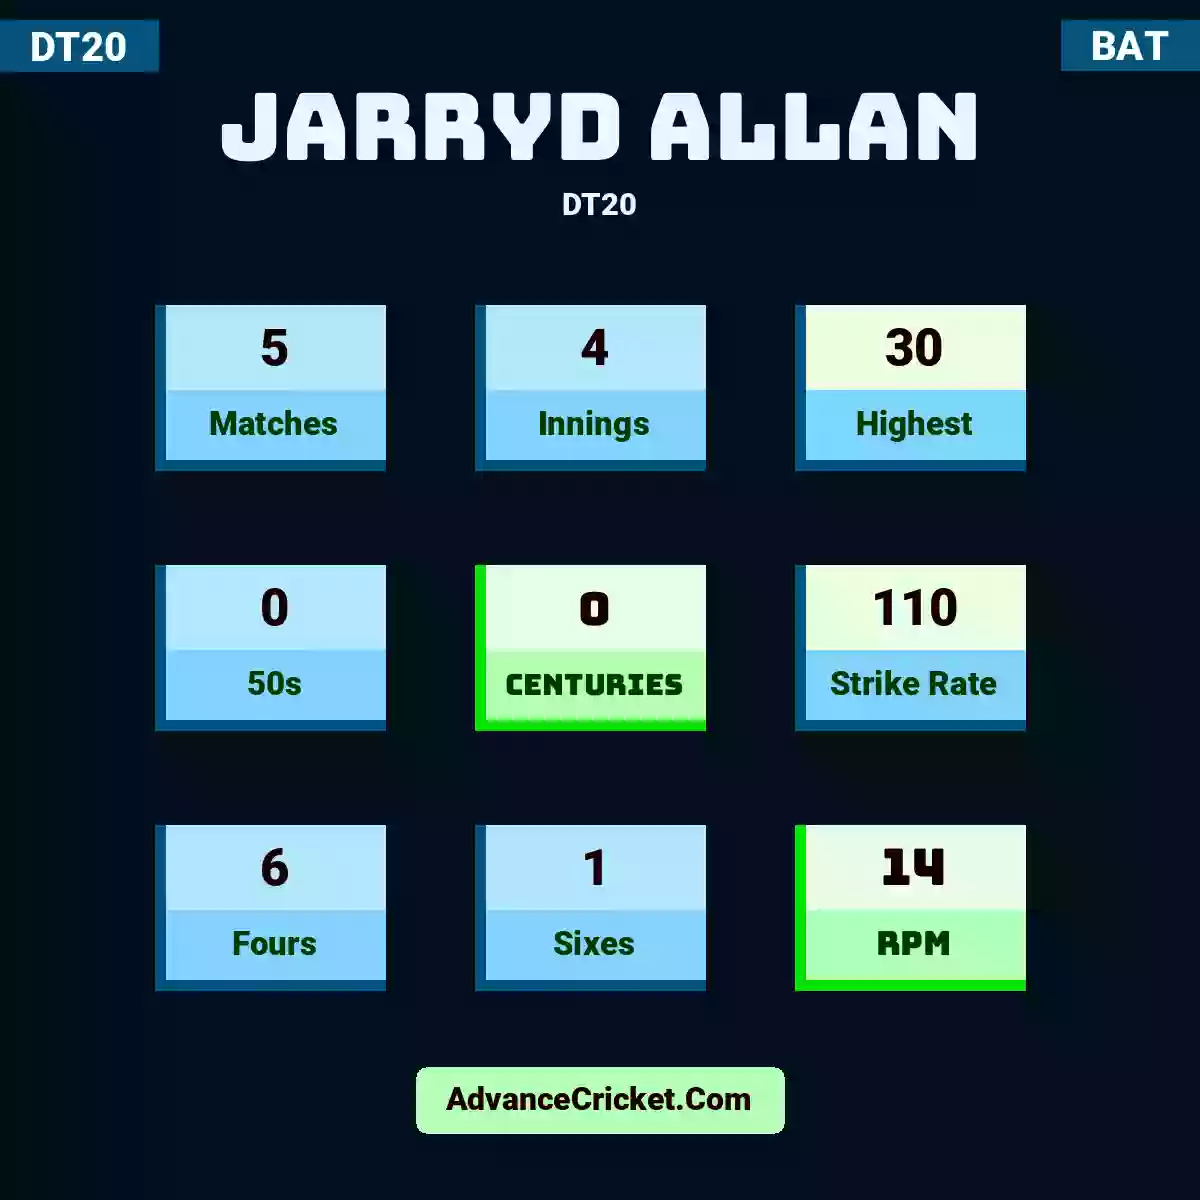 Jarryd Allan DT20 , Jarryd Allan played 5 matches, scored 30 runs as highest, 0 half-centuries, and 0 centuries, with a strike rate of 110. J.Allan hit 6 fours and 1 sixes, with an RPM of 14.